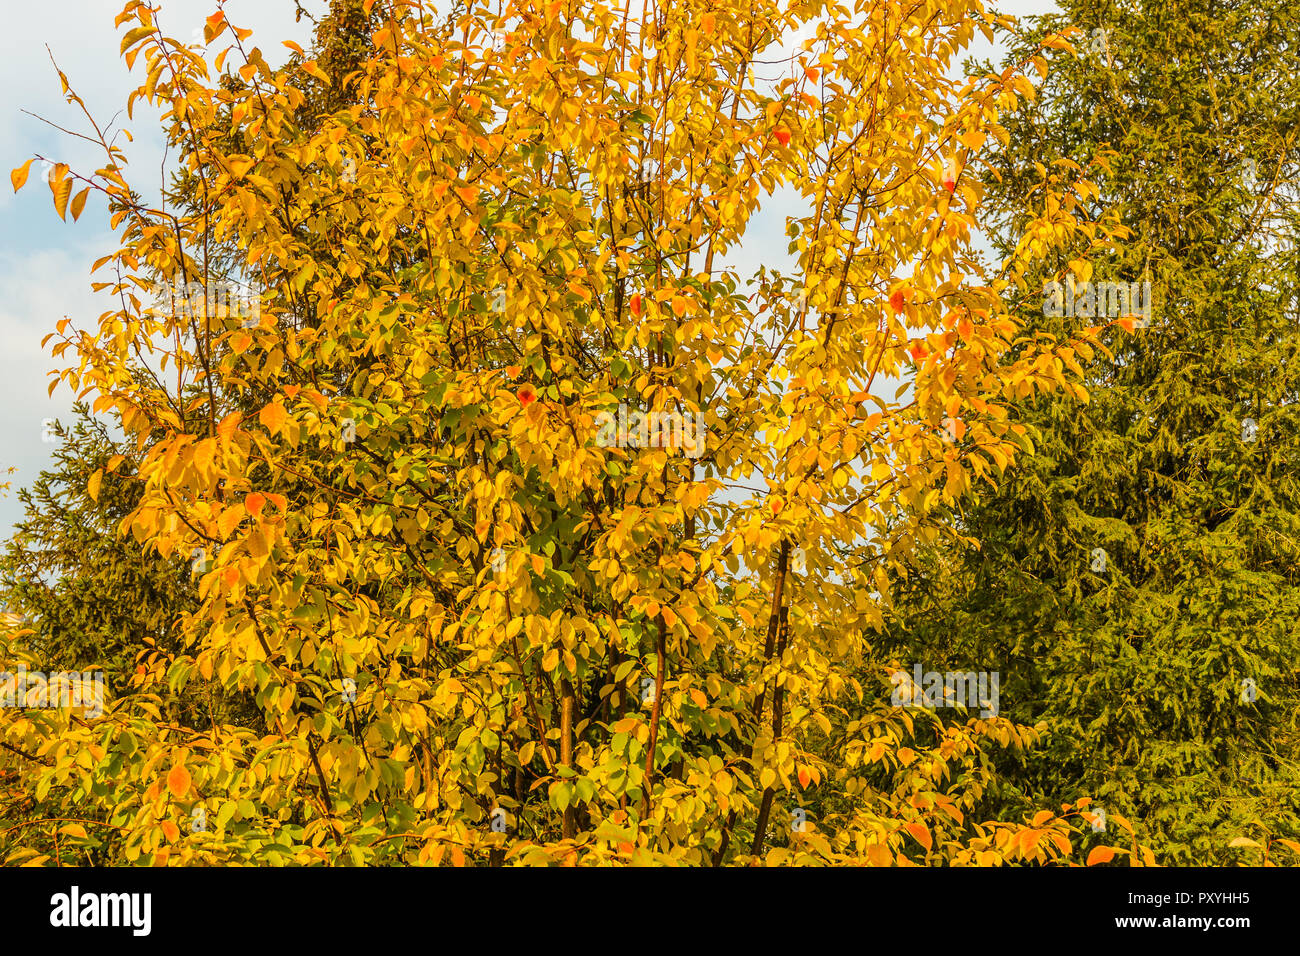 A tree with yellow leaves and a spruce tree in fall. Sunny day of the golden autumn season Stock Photo